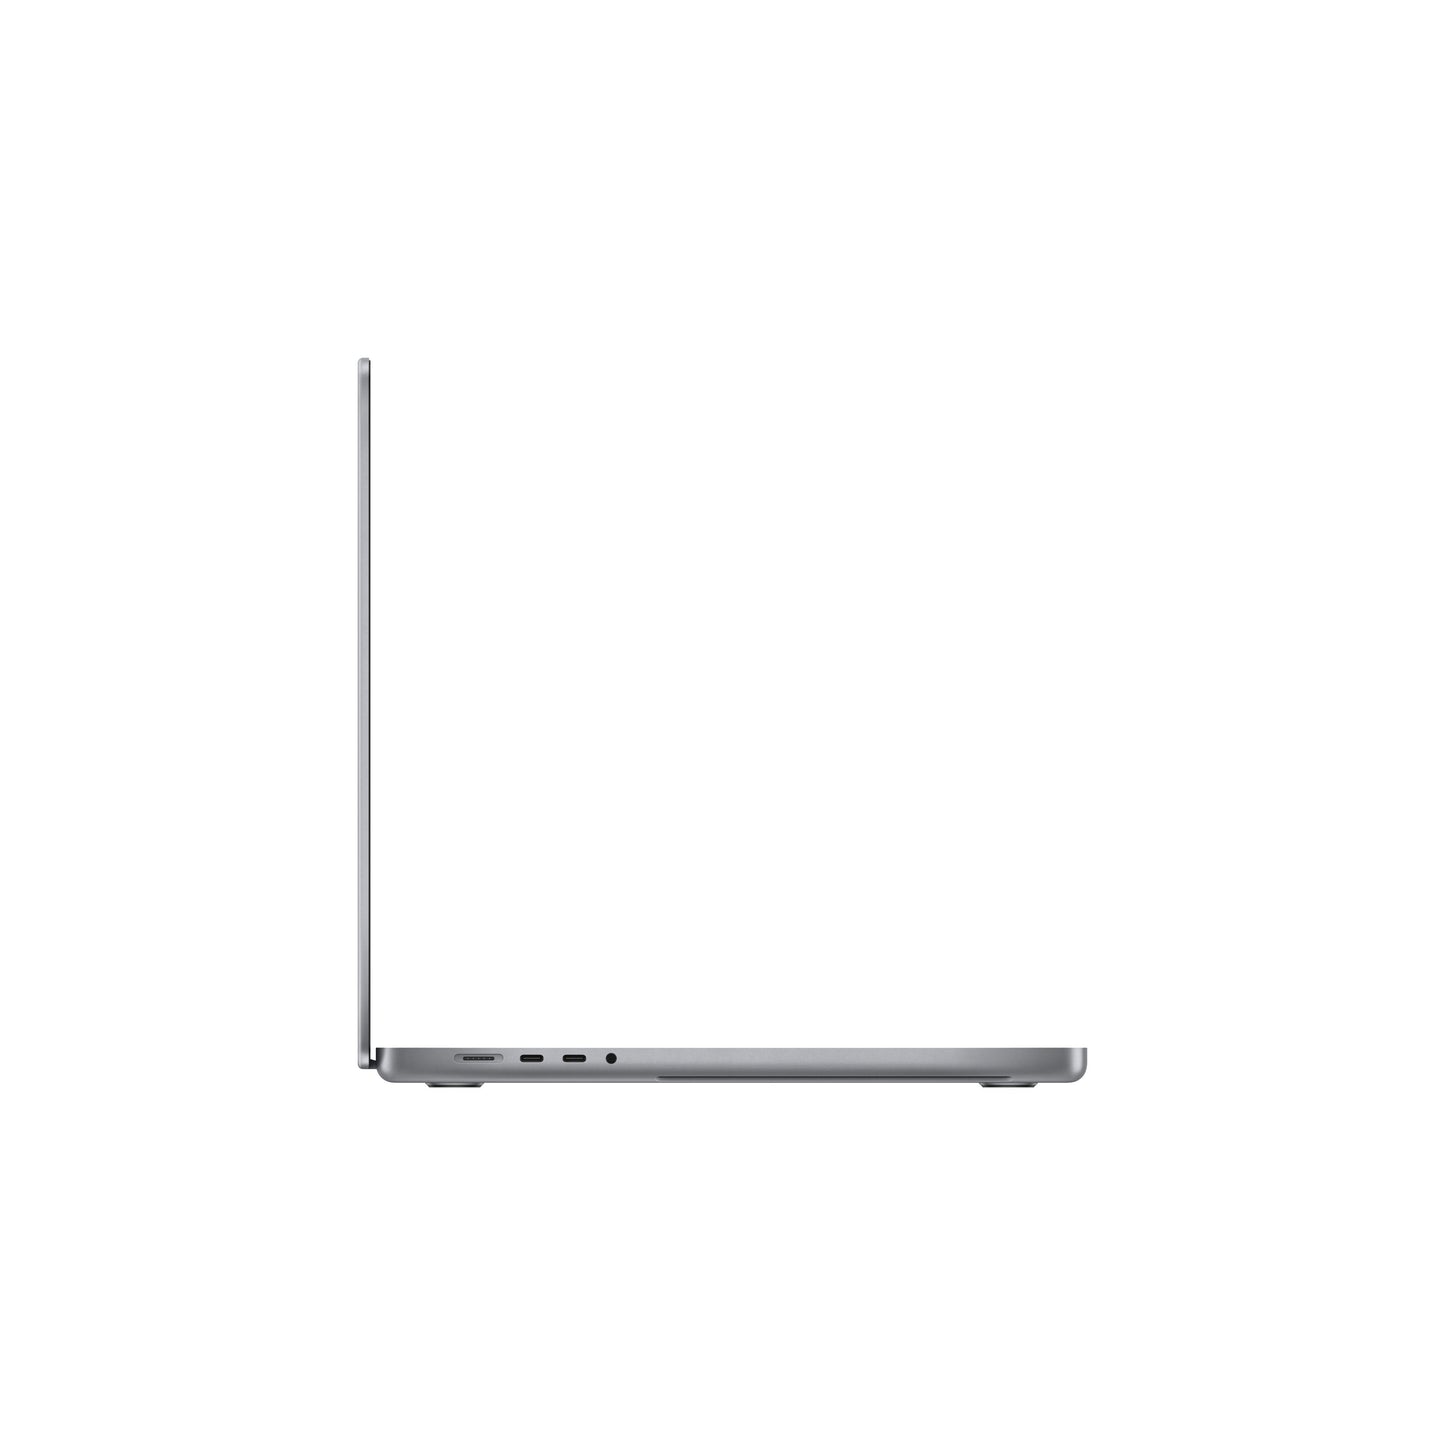 16-inch MacBook Pro: Apple M1 Pro chip with 10_core CPU and 16_core GPU 1TB SSD - Space Grey